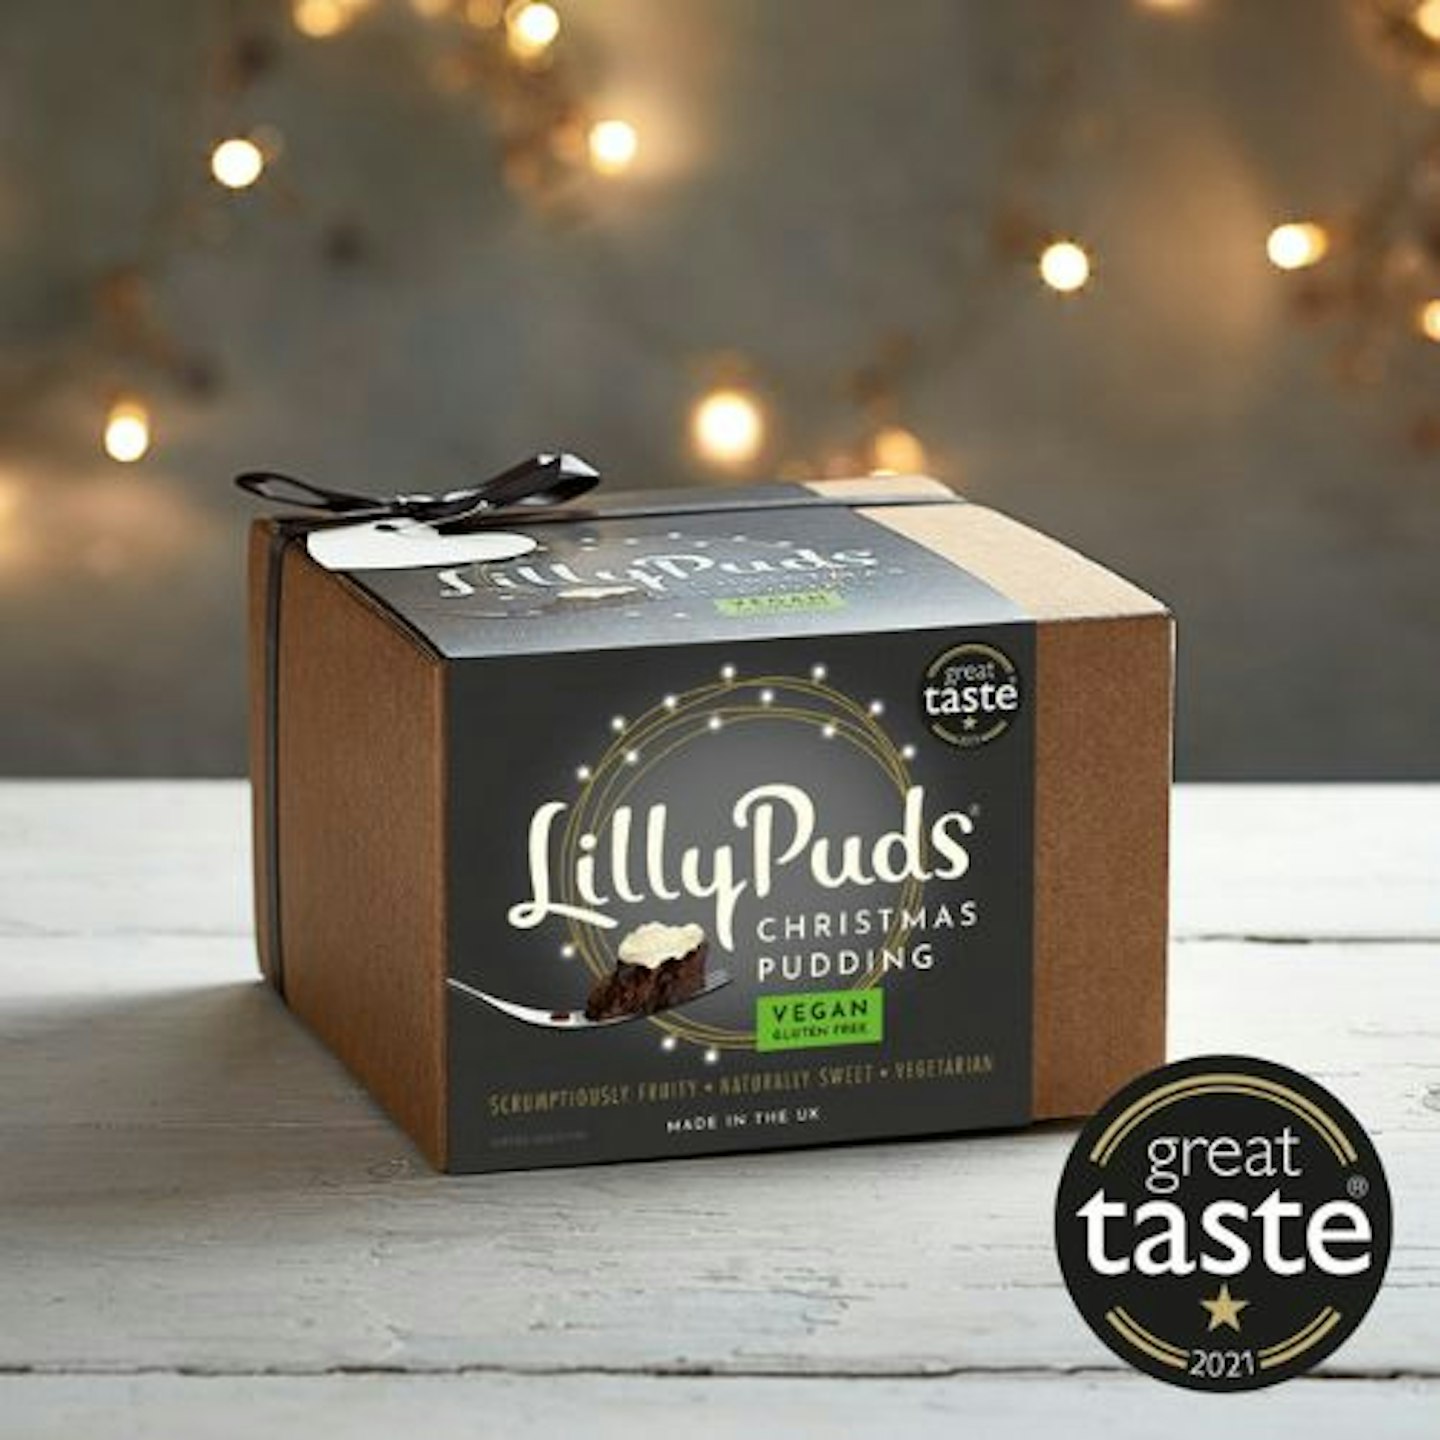 LillyPuds - Christmas Dinner essentials